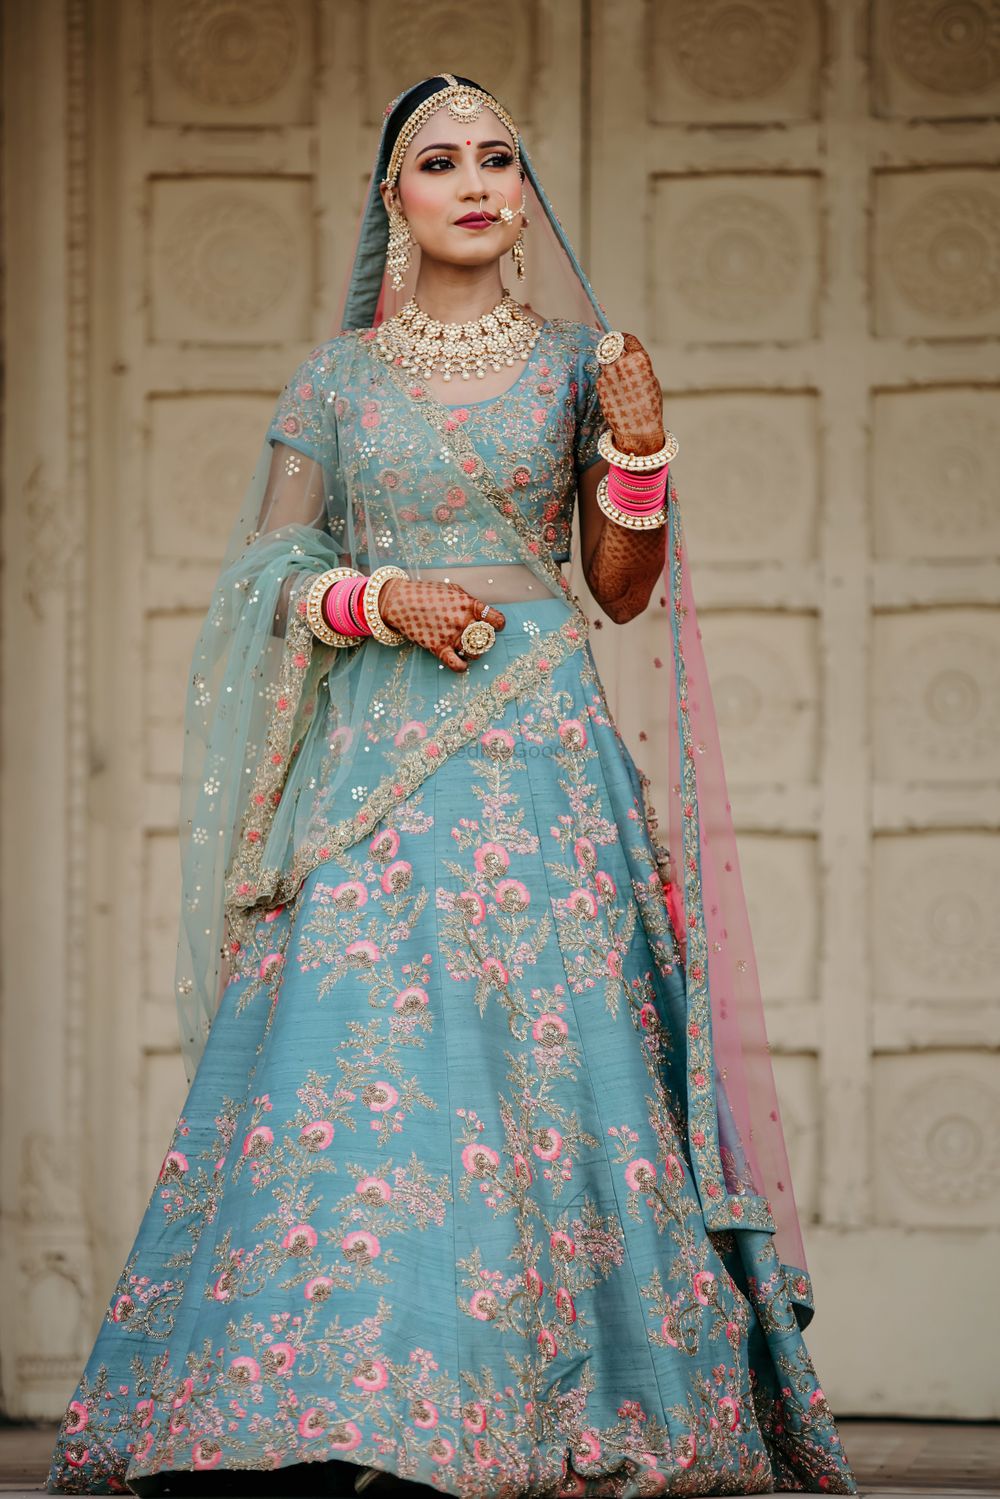 Photo of A bride in a blue lehenga with pink chooda